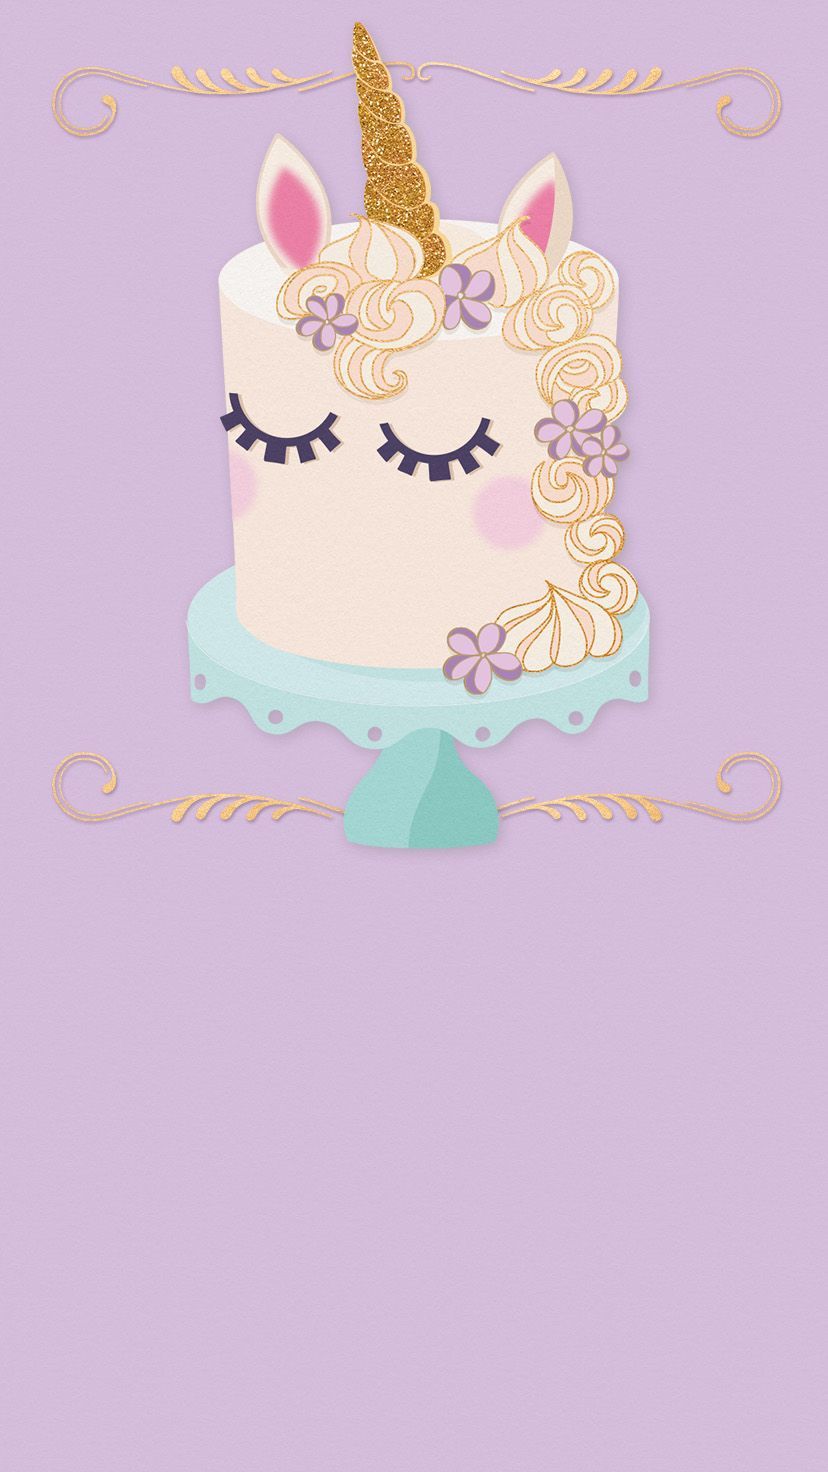 How cute is this unicorn cake design?! Plan a birthday for